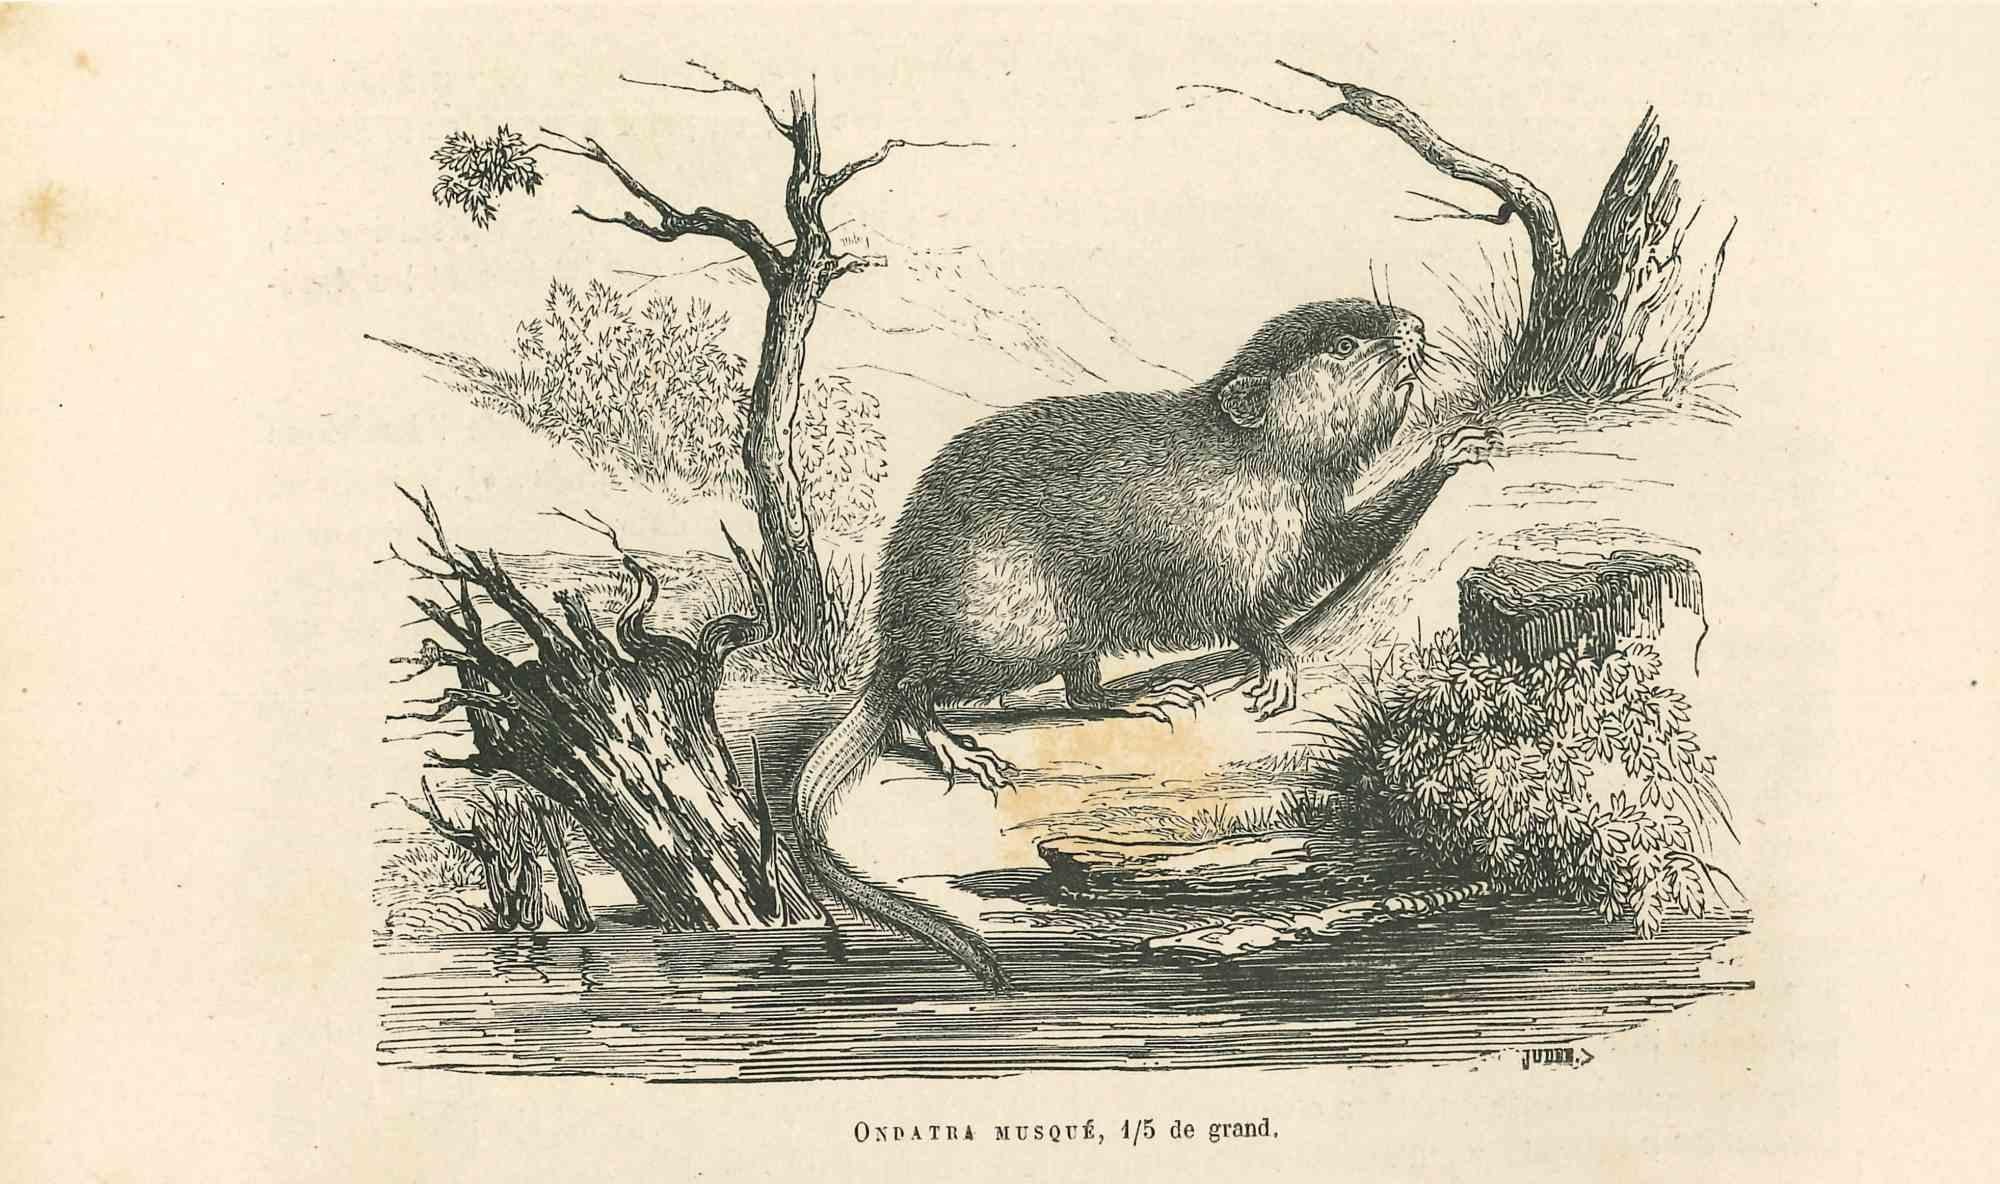 The Mouse is an original lithograph on ivory-colored paper, realized by Paul Gervais (1816-1879). The artwork is from The Series of "Les Trois Règnes de la Nature", and was published in 1854.

Good conditions with minor stain.

Titled on the lower.